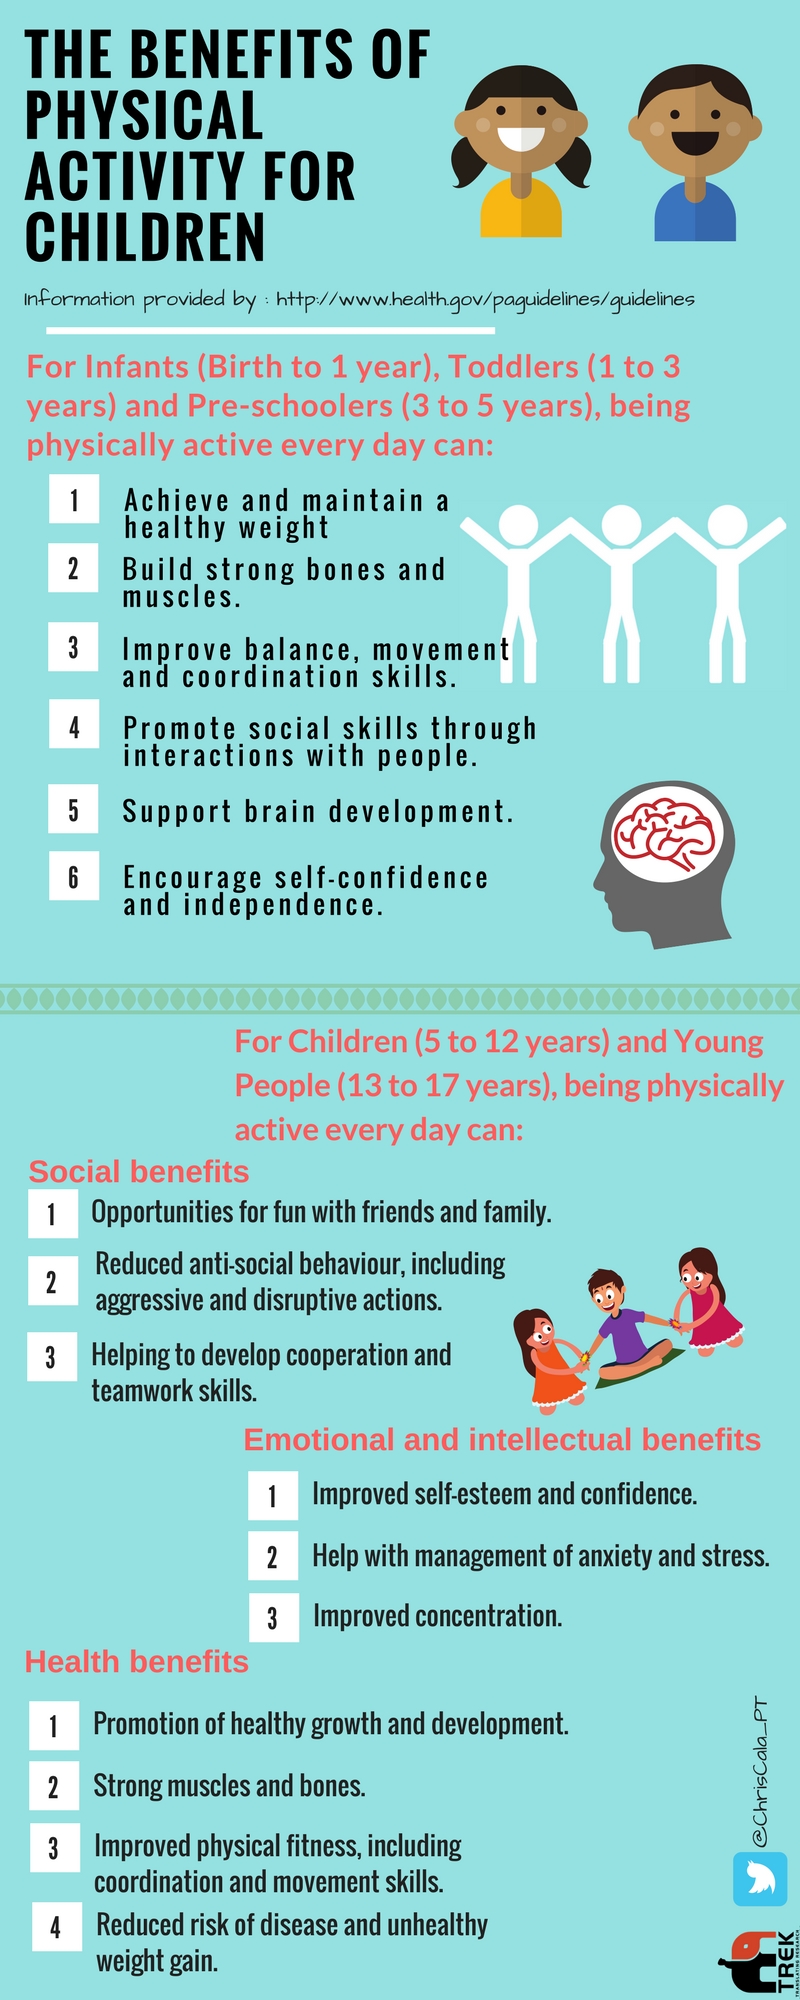 The Benefits of Physical Education for Children with Special Needs